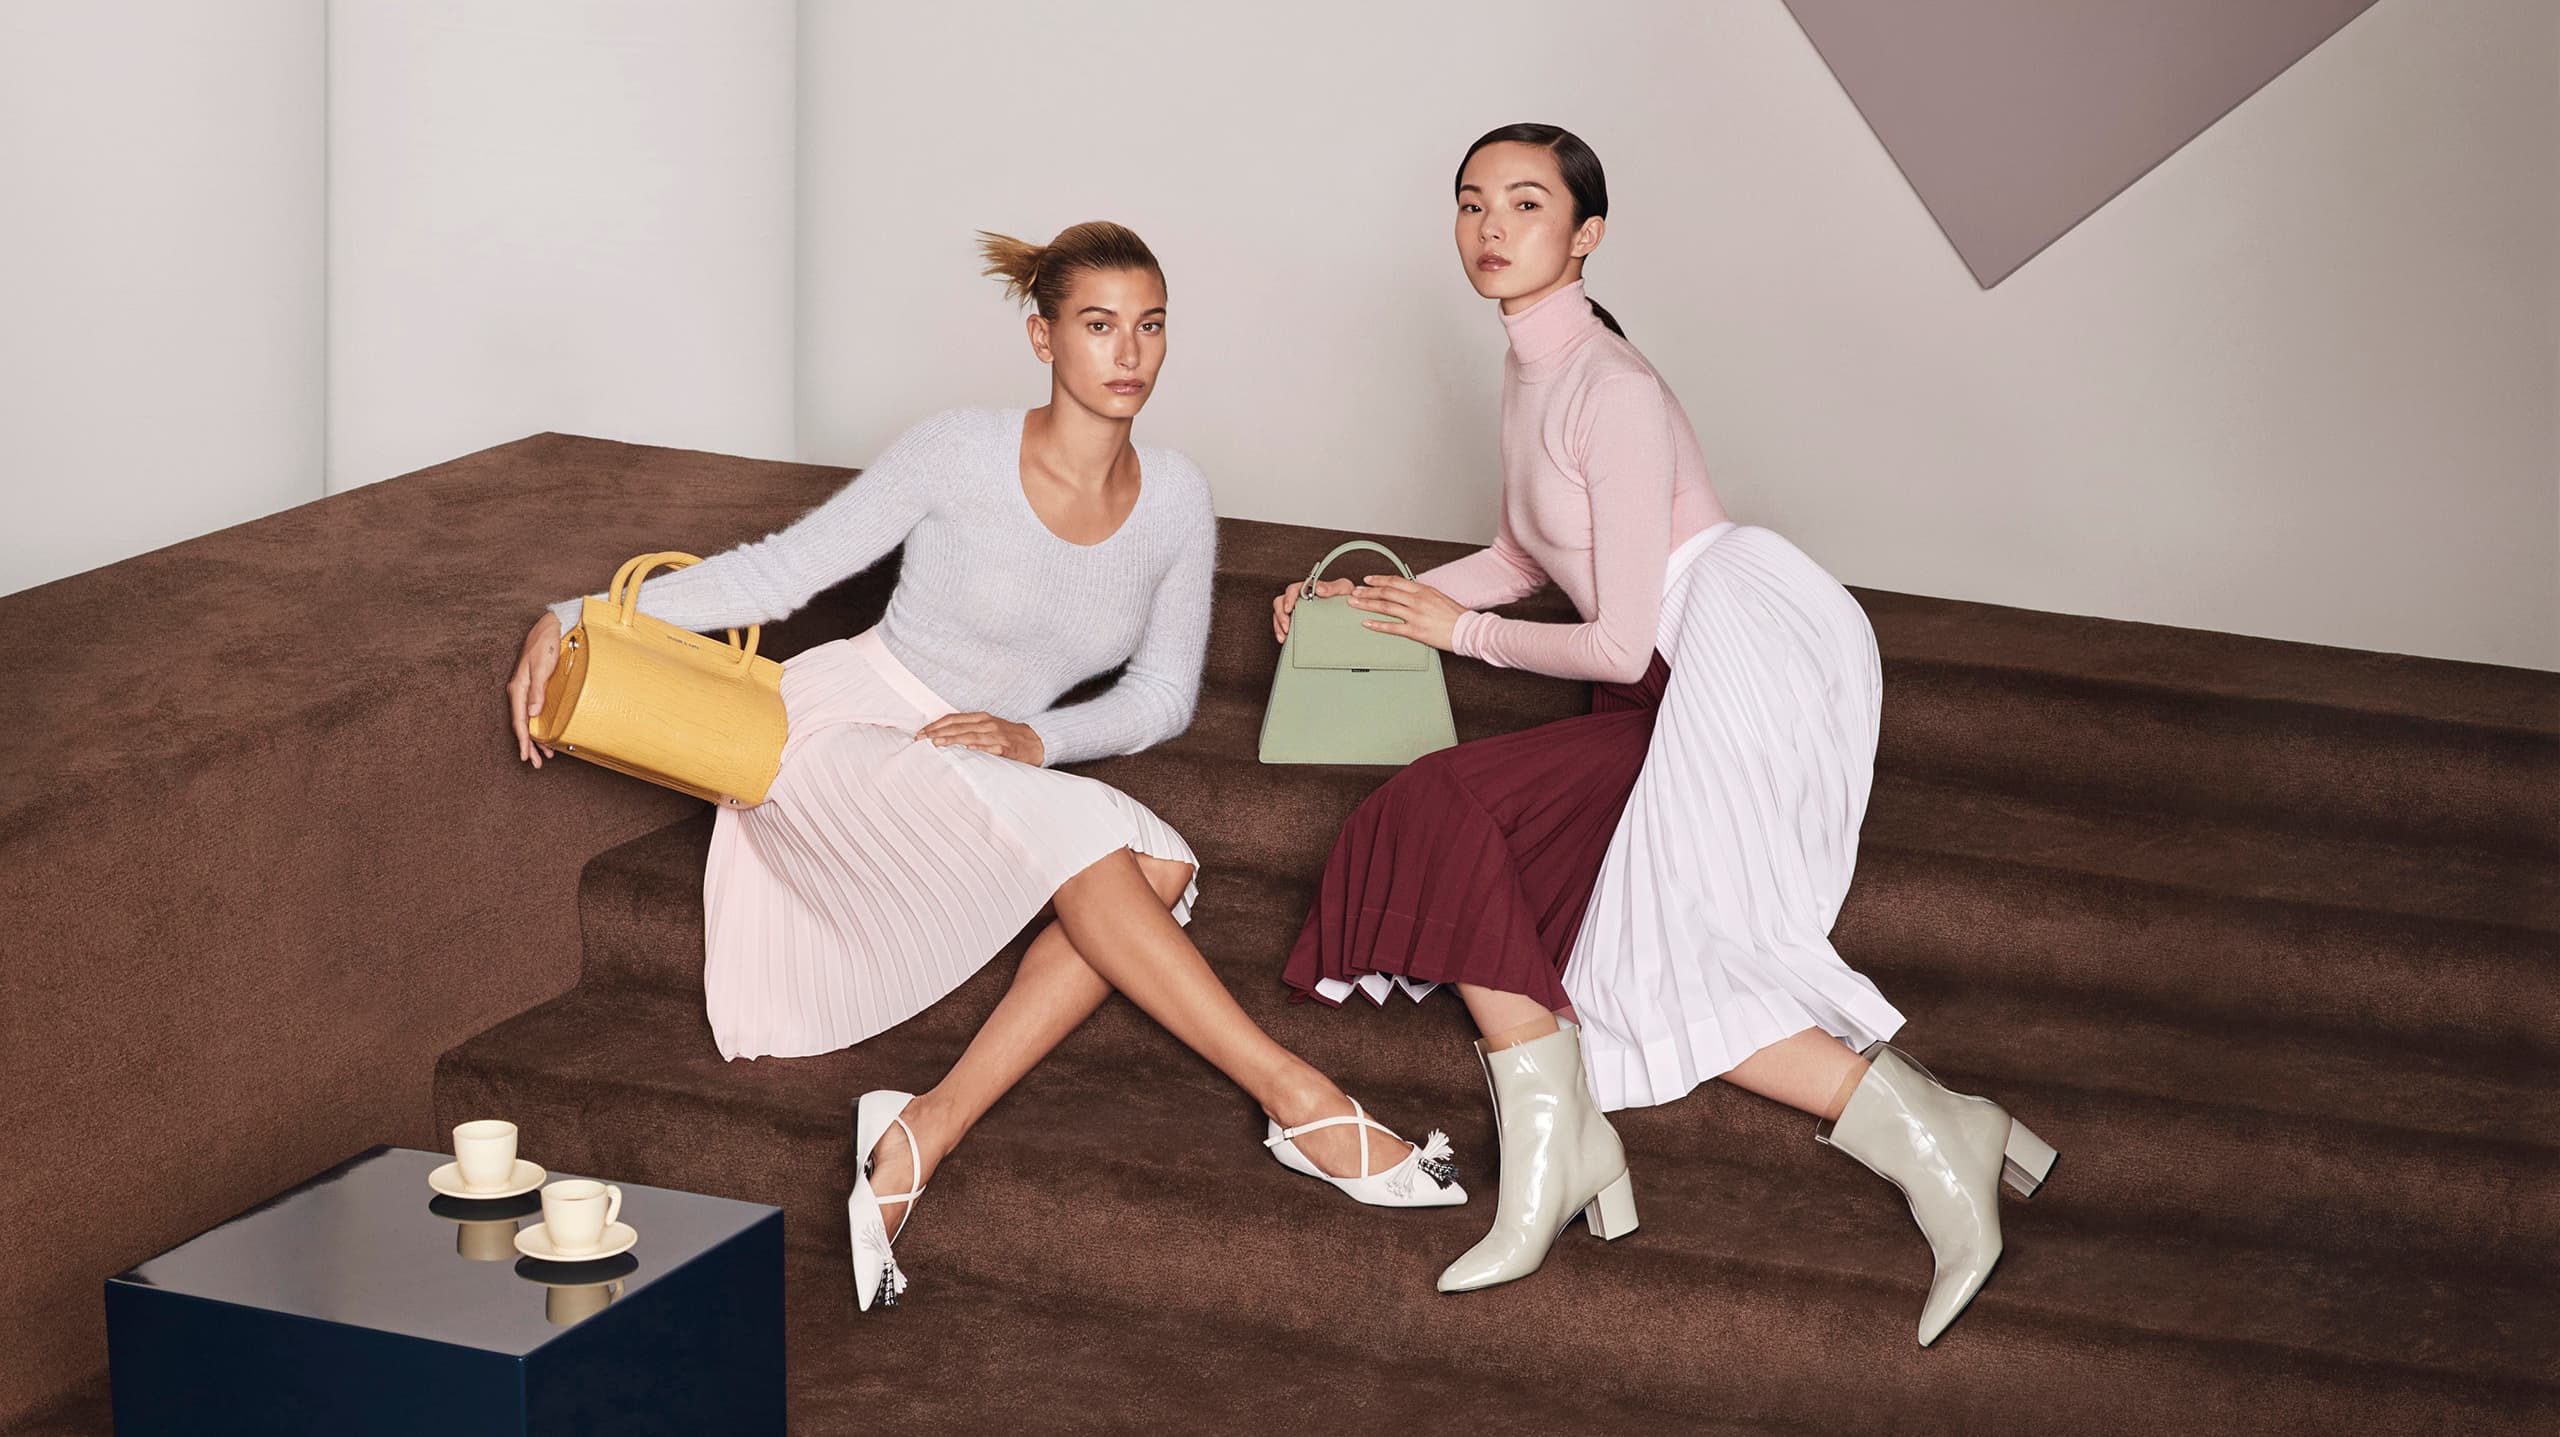 Charles & Keith Fall Winter 2019 Editorial